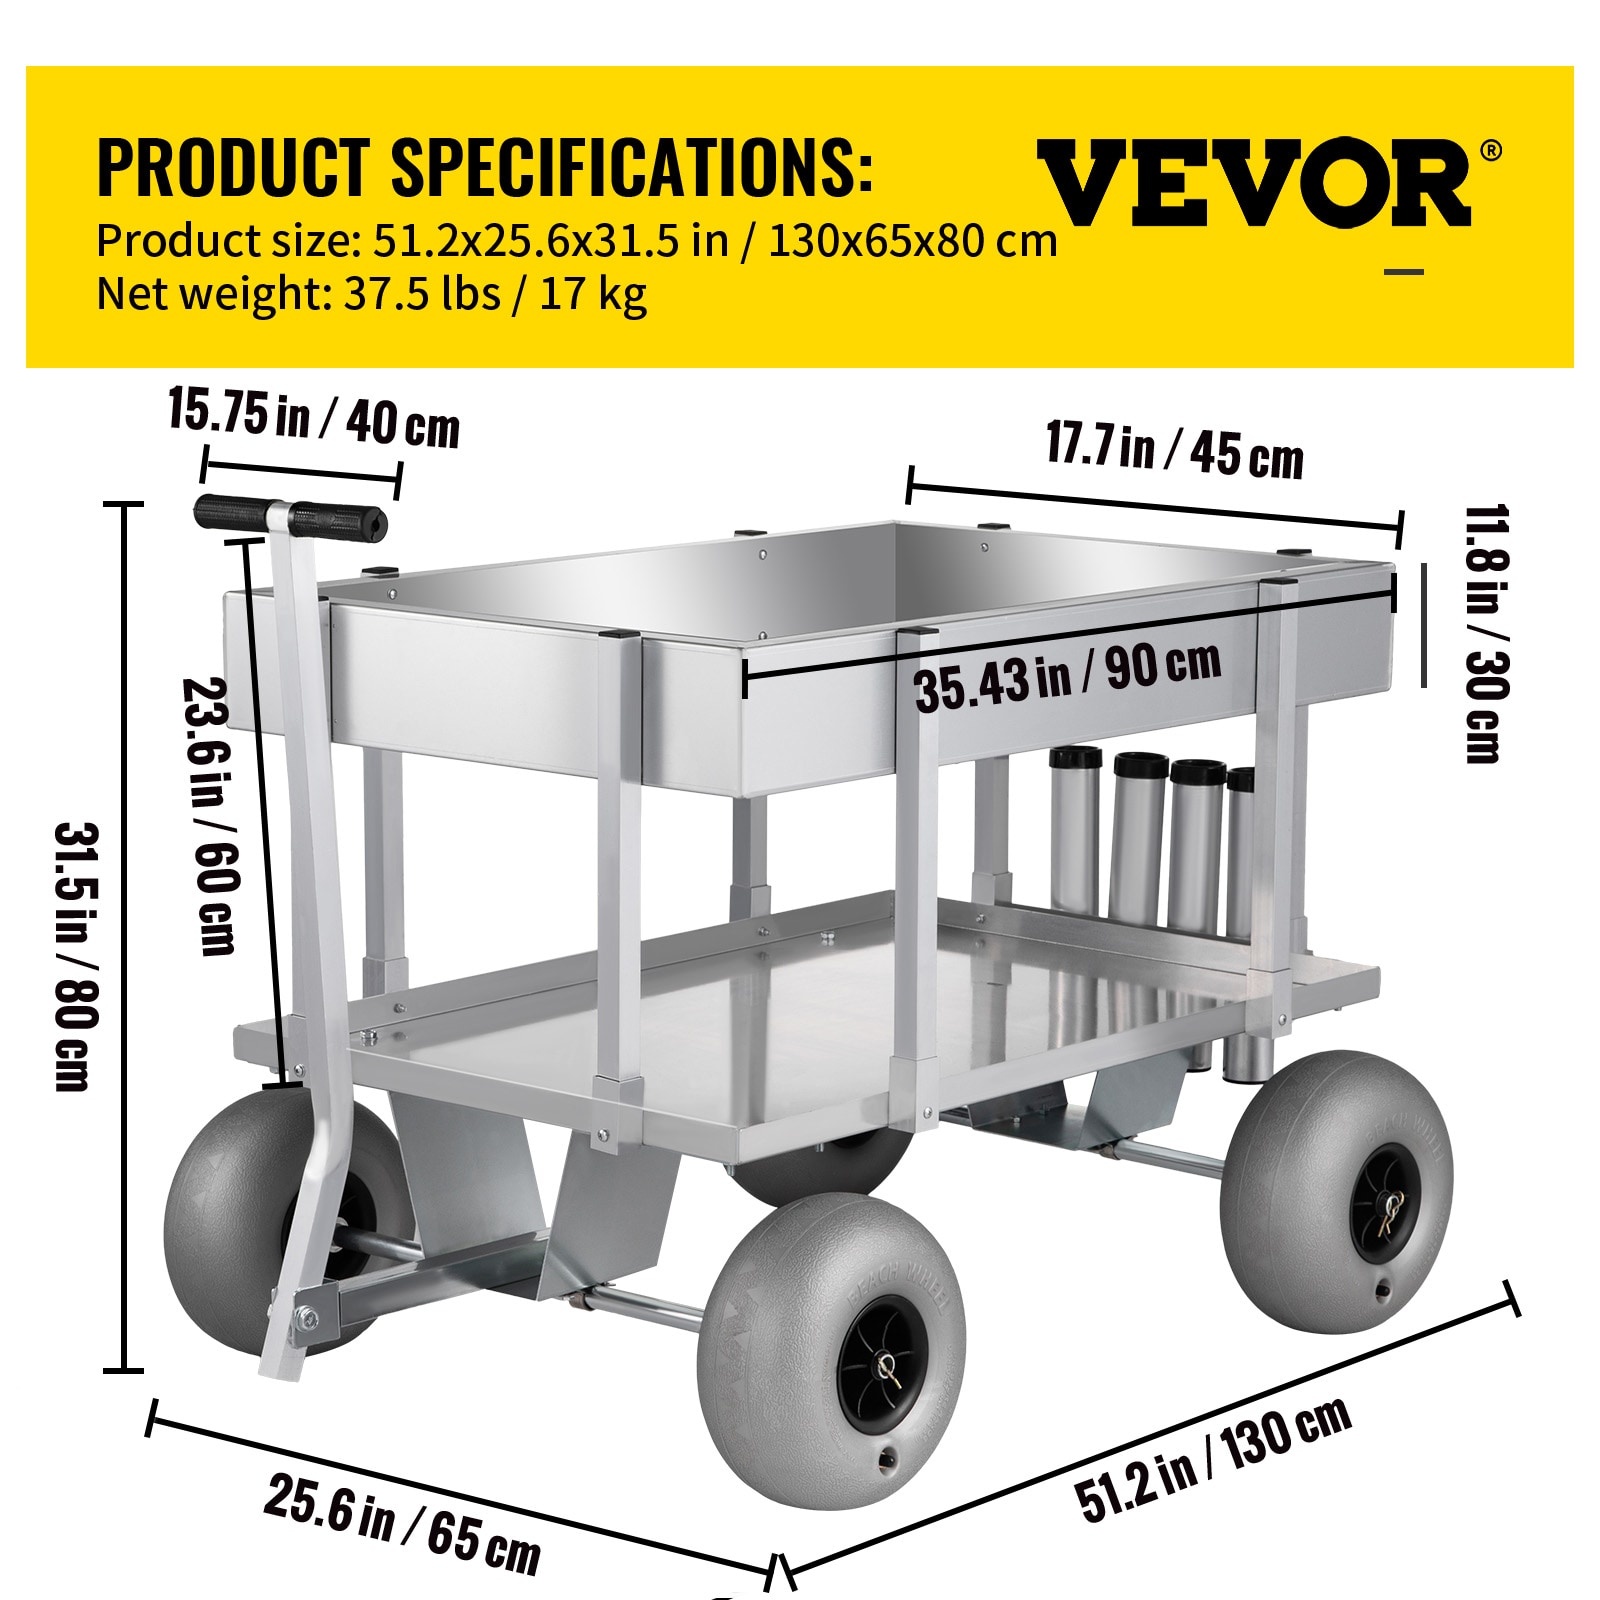 VEVOR Beach Fishing Cart 300 lbs Load Capacity Foldable Fish and Marine Cart with Four 11 Big Wheels Rubber Balloon Tires for Sand Heavy-Duty Steel